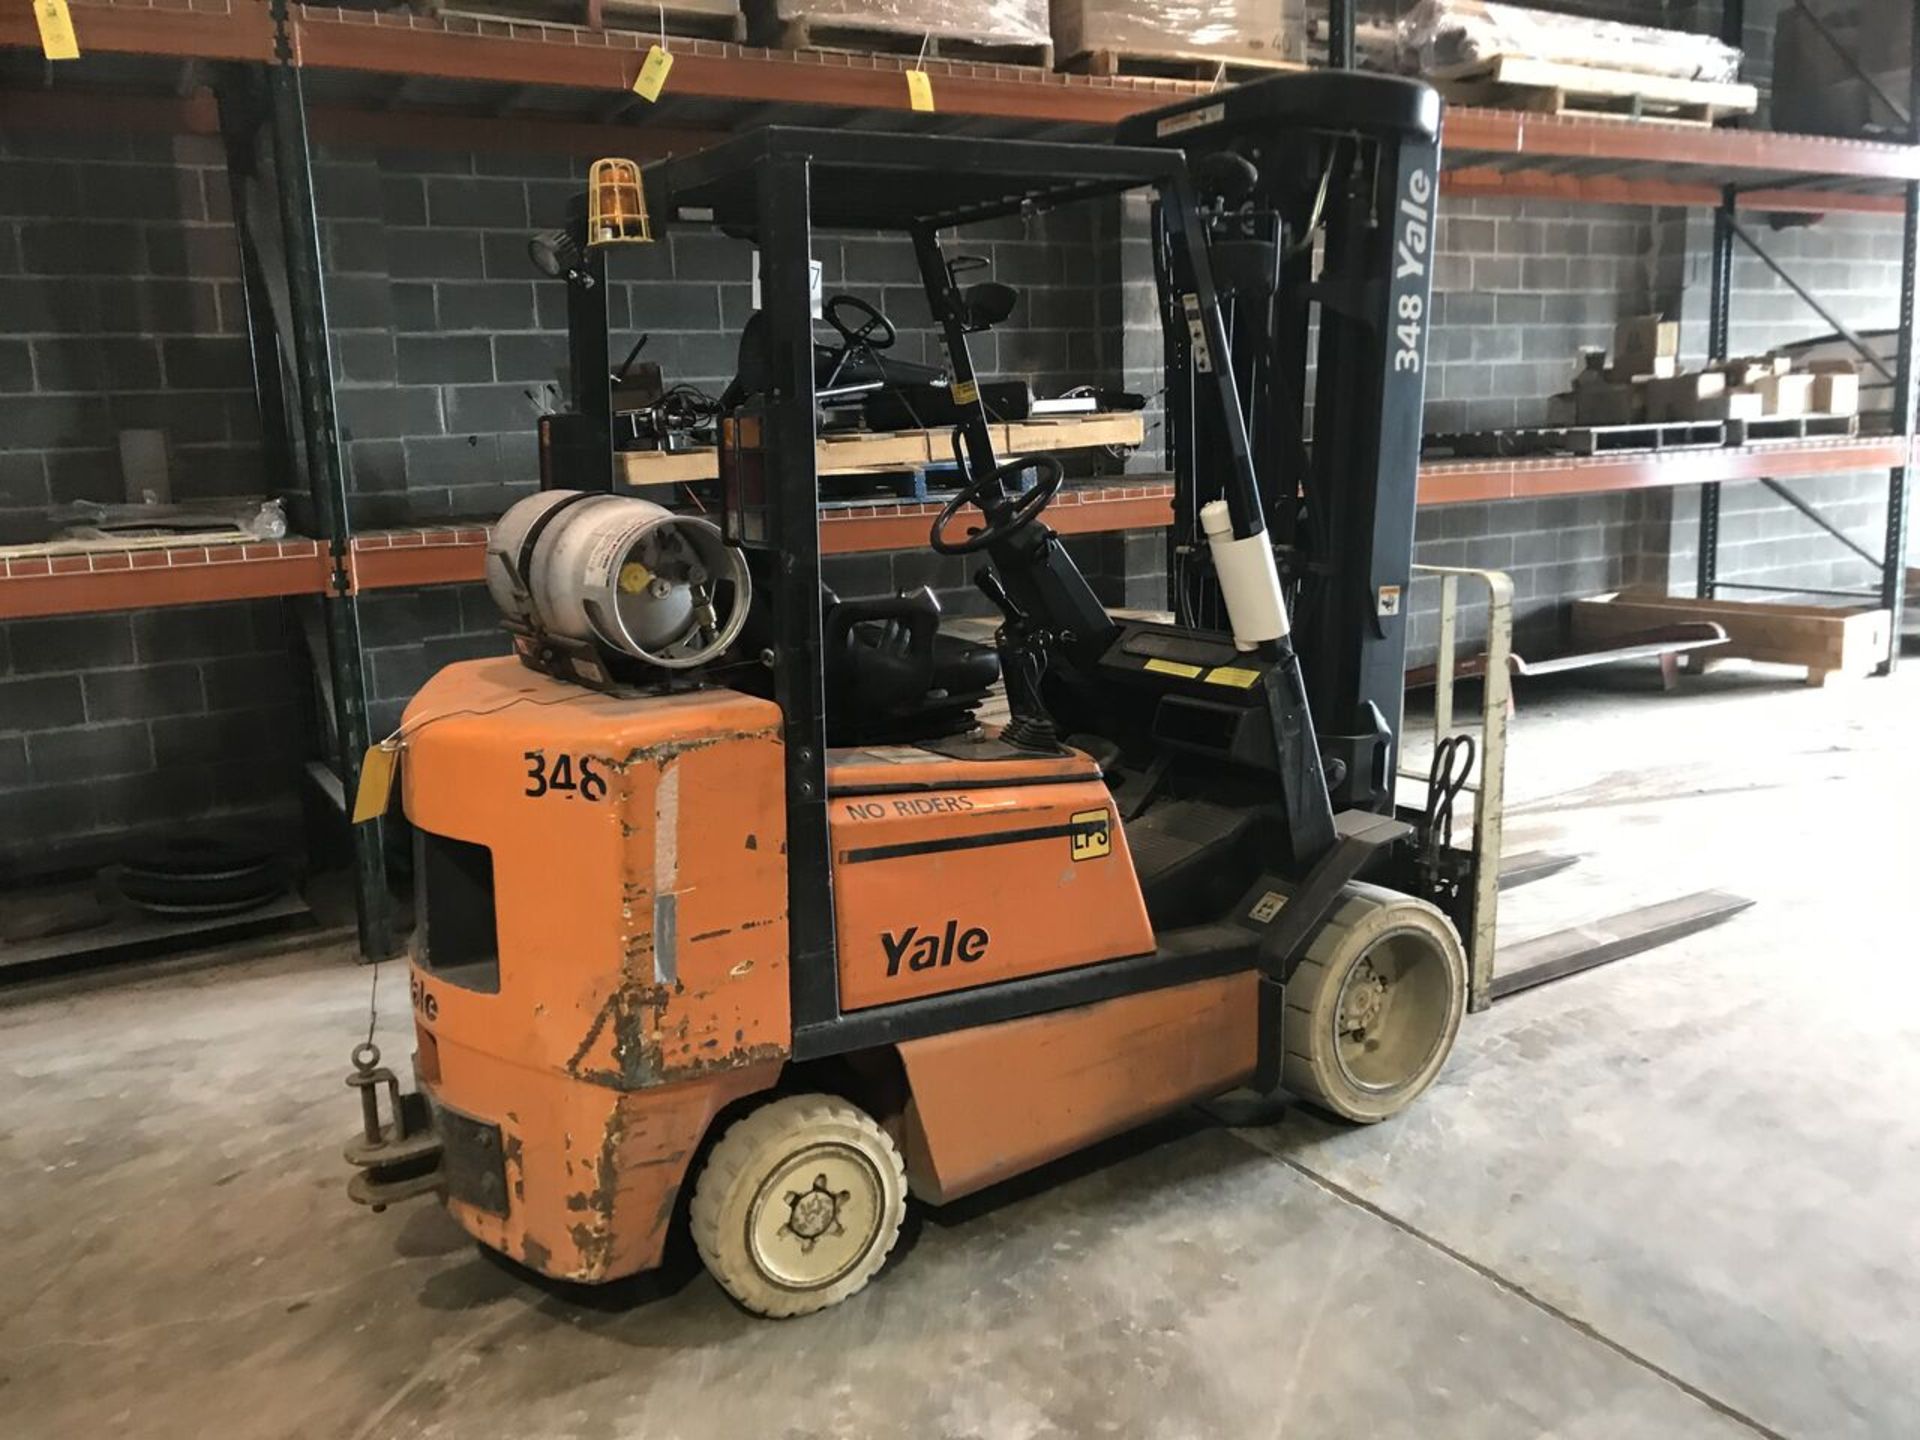 Yale Forklift, Model #348, Hrs: 3711.9, S/N #E187V15969Y, Truck Weight = 10707 Lbs; Rigging Fee: $50